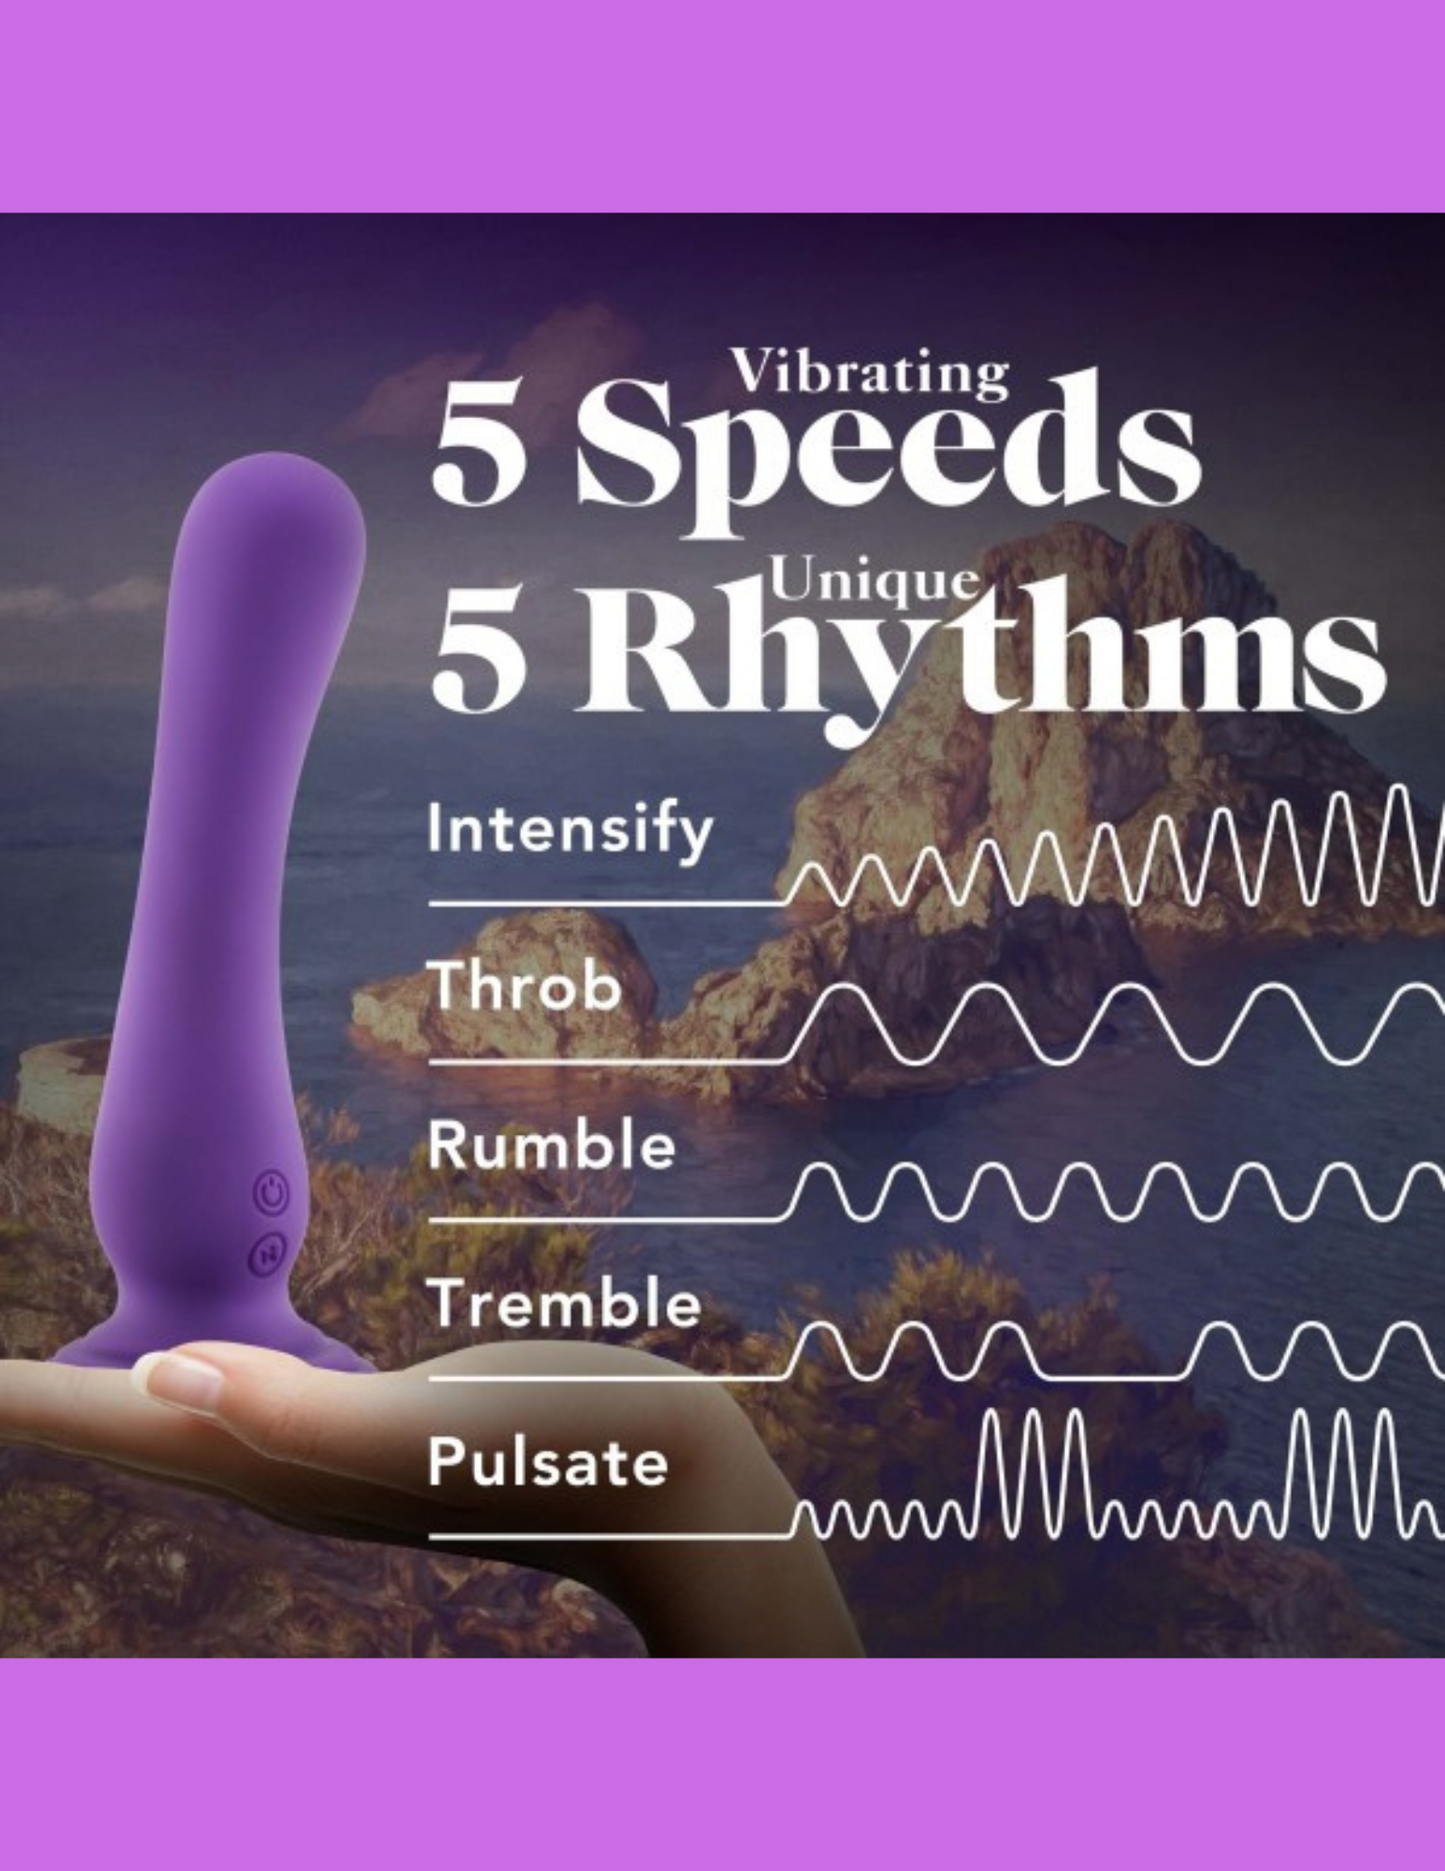 Image shows the various speeds and patterns of the Impressions Ibiza Vibrator from Blush (purple).